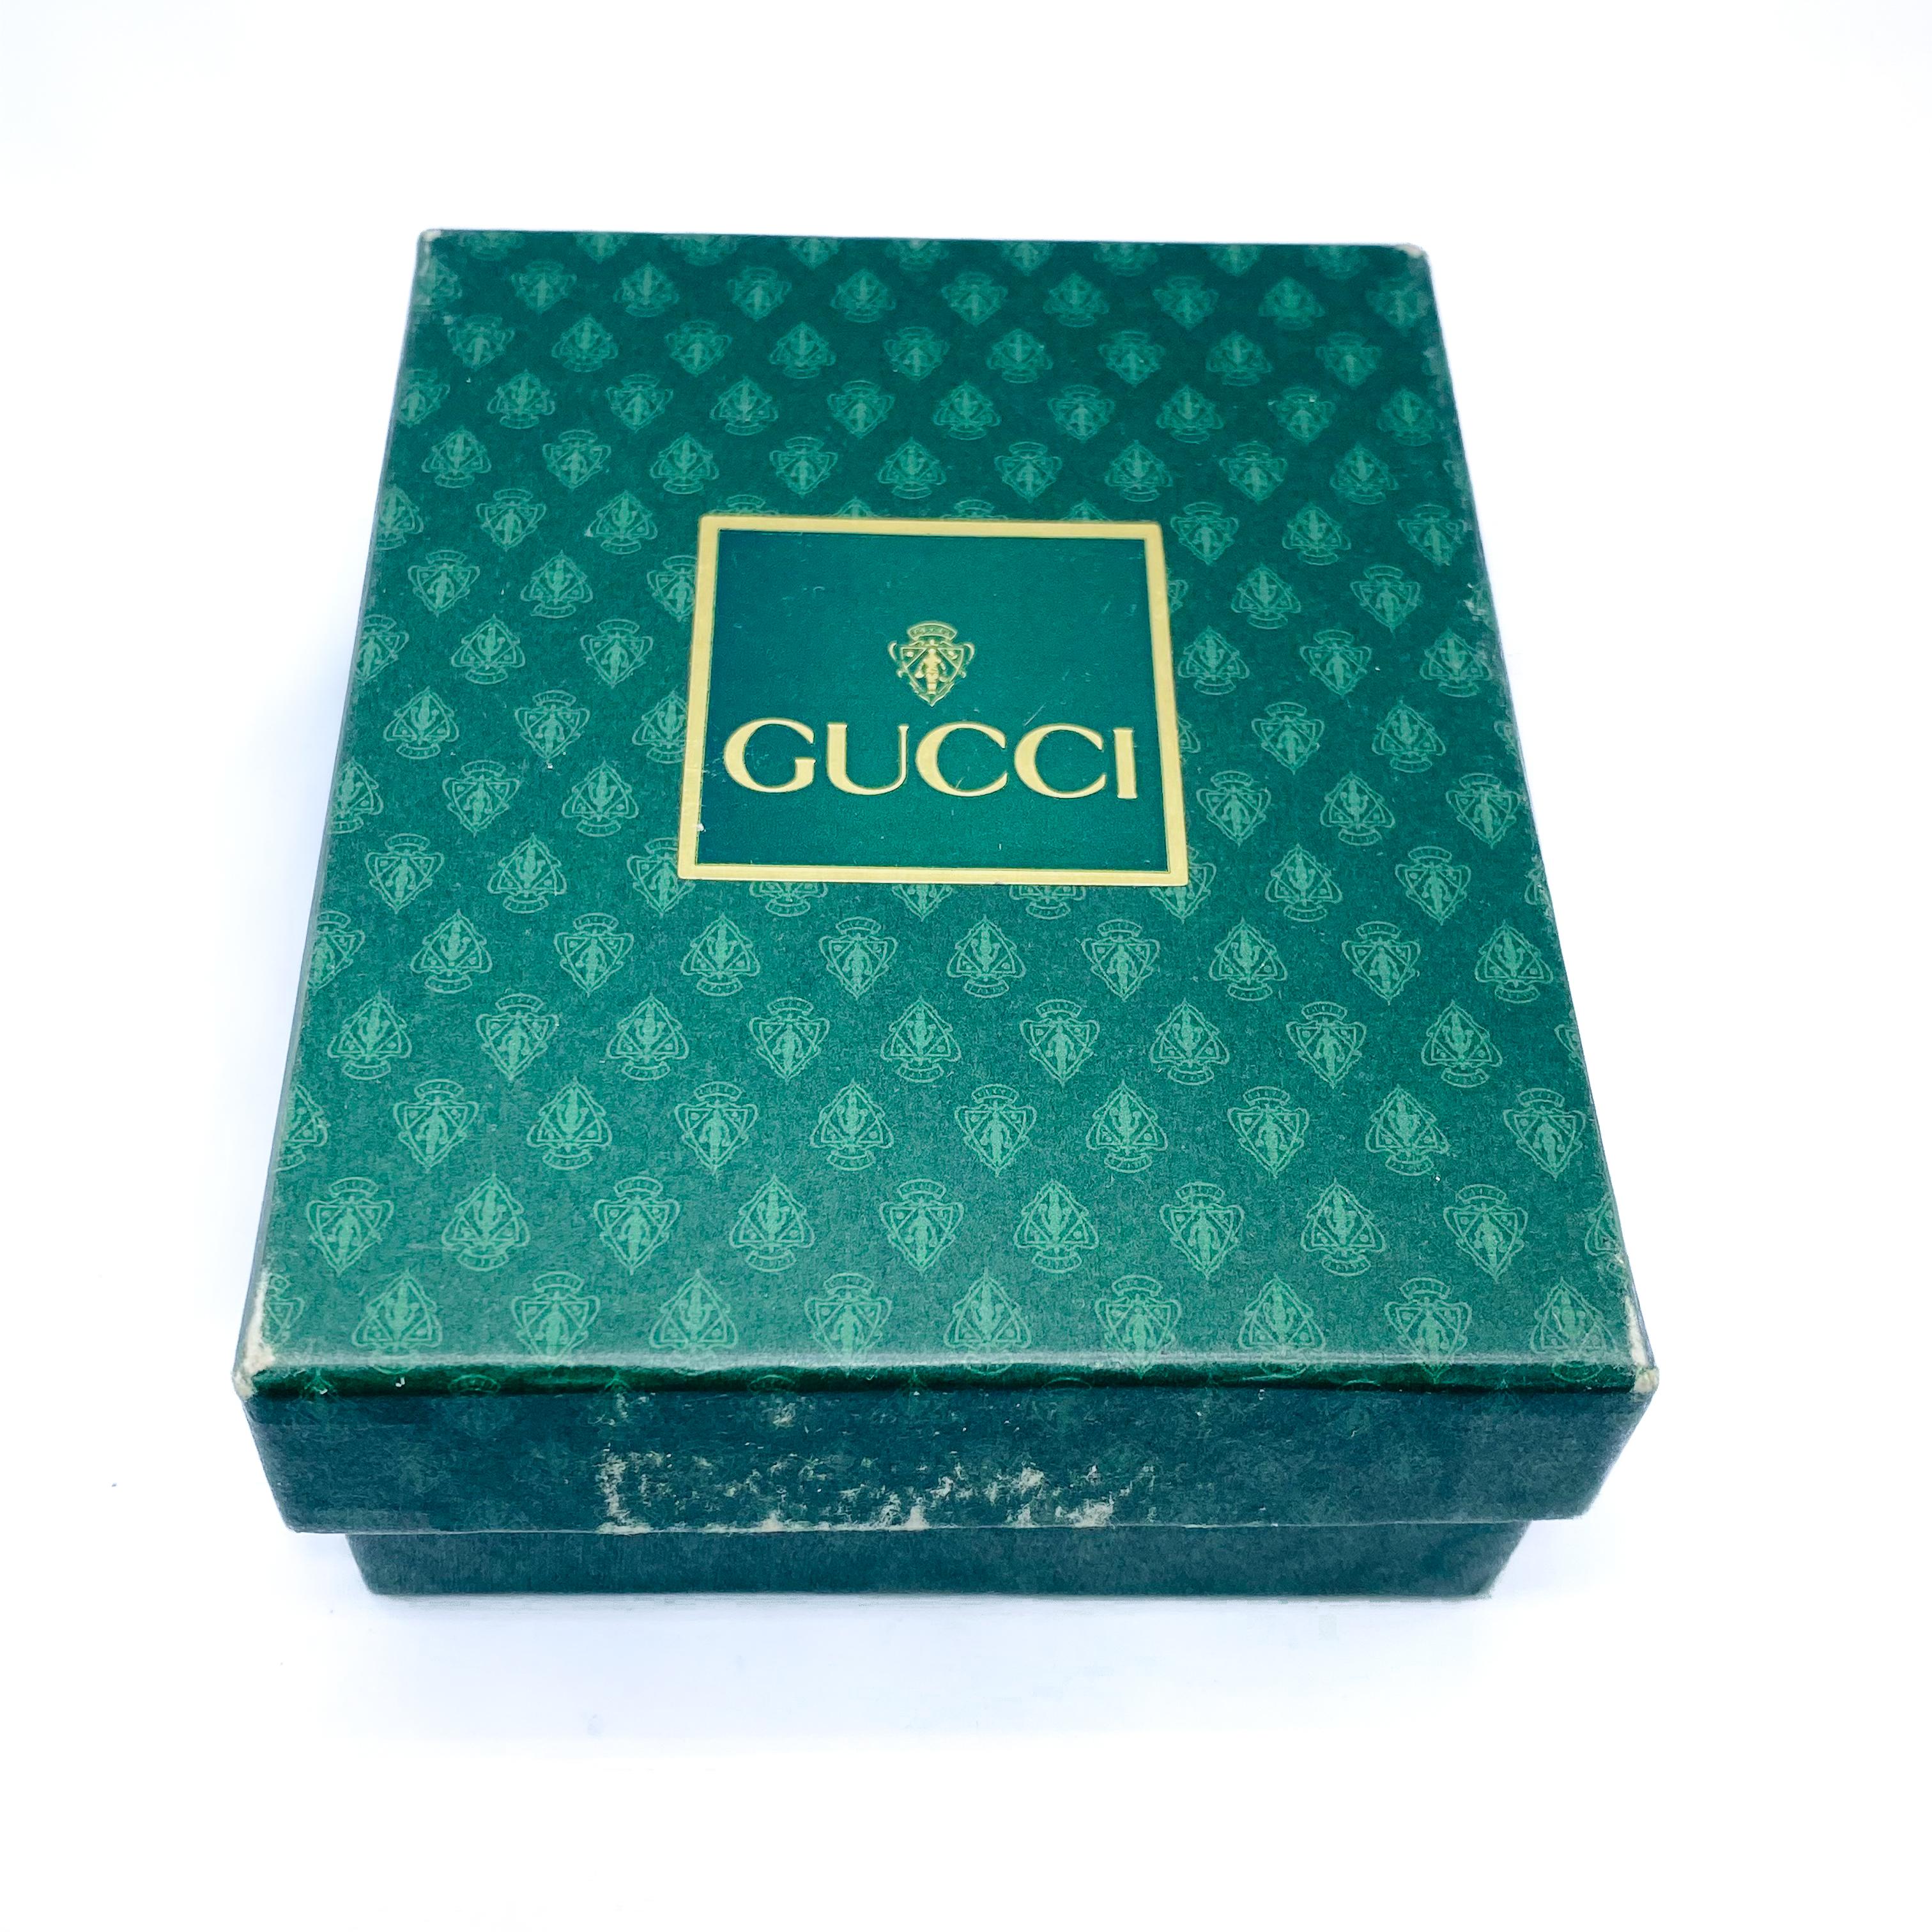 Gucci Vintage 1990s Bracelet 1991 Collection

Super cool rare piece from the early 90s Gucci archive

Detail
-Crafted from high quality gold plated metal
-Made in Italy for the 1991 collection
-Knotted rope design
-Comes with original suede pouch